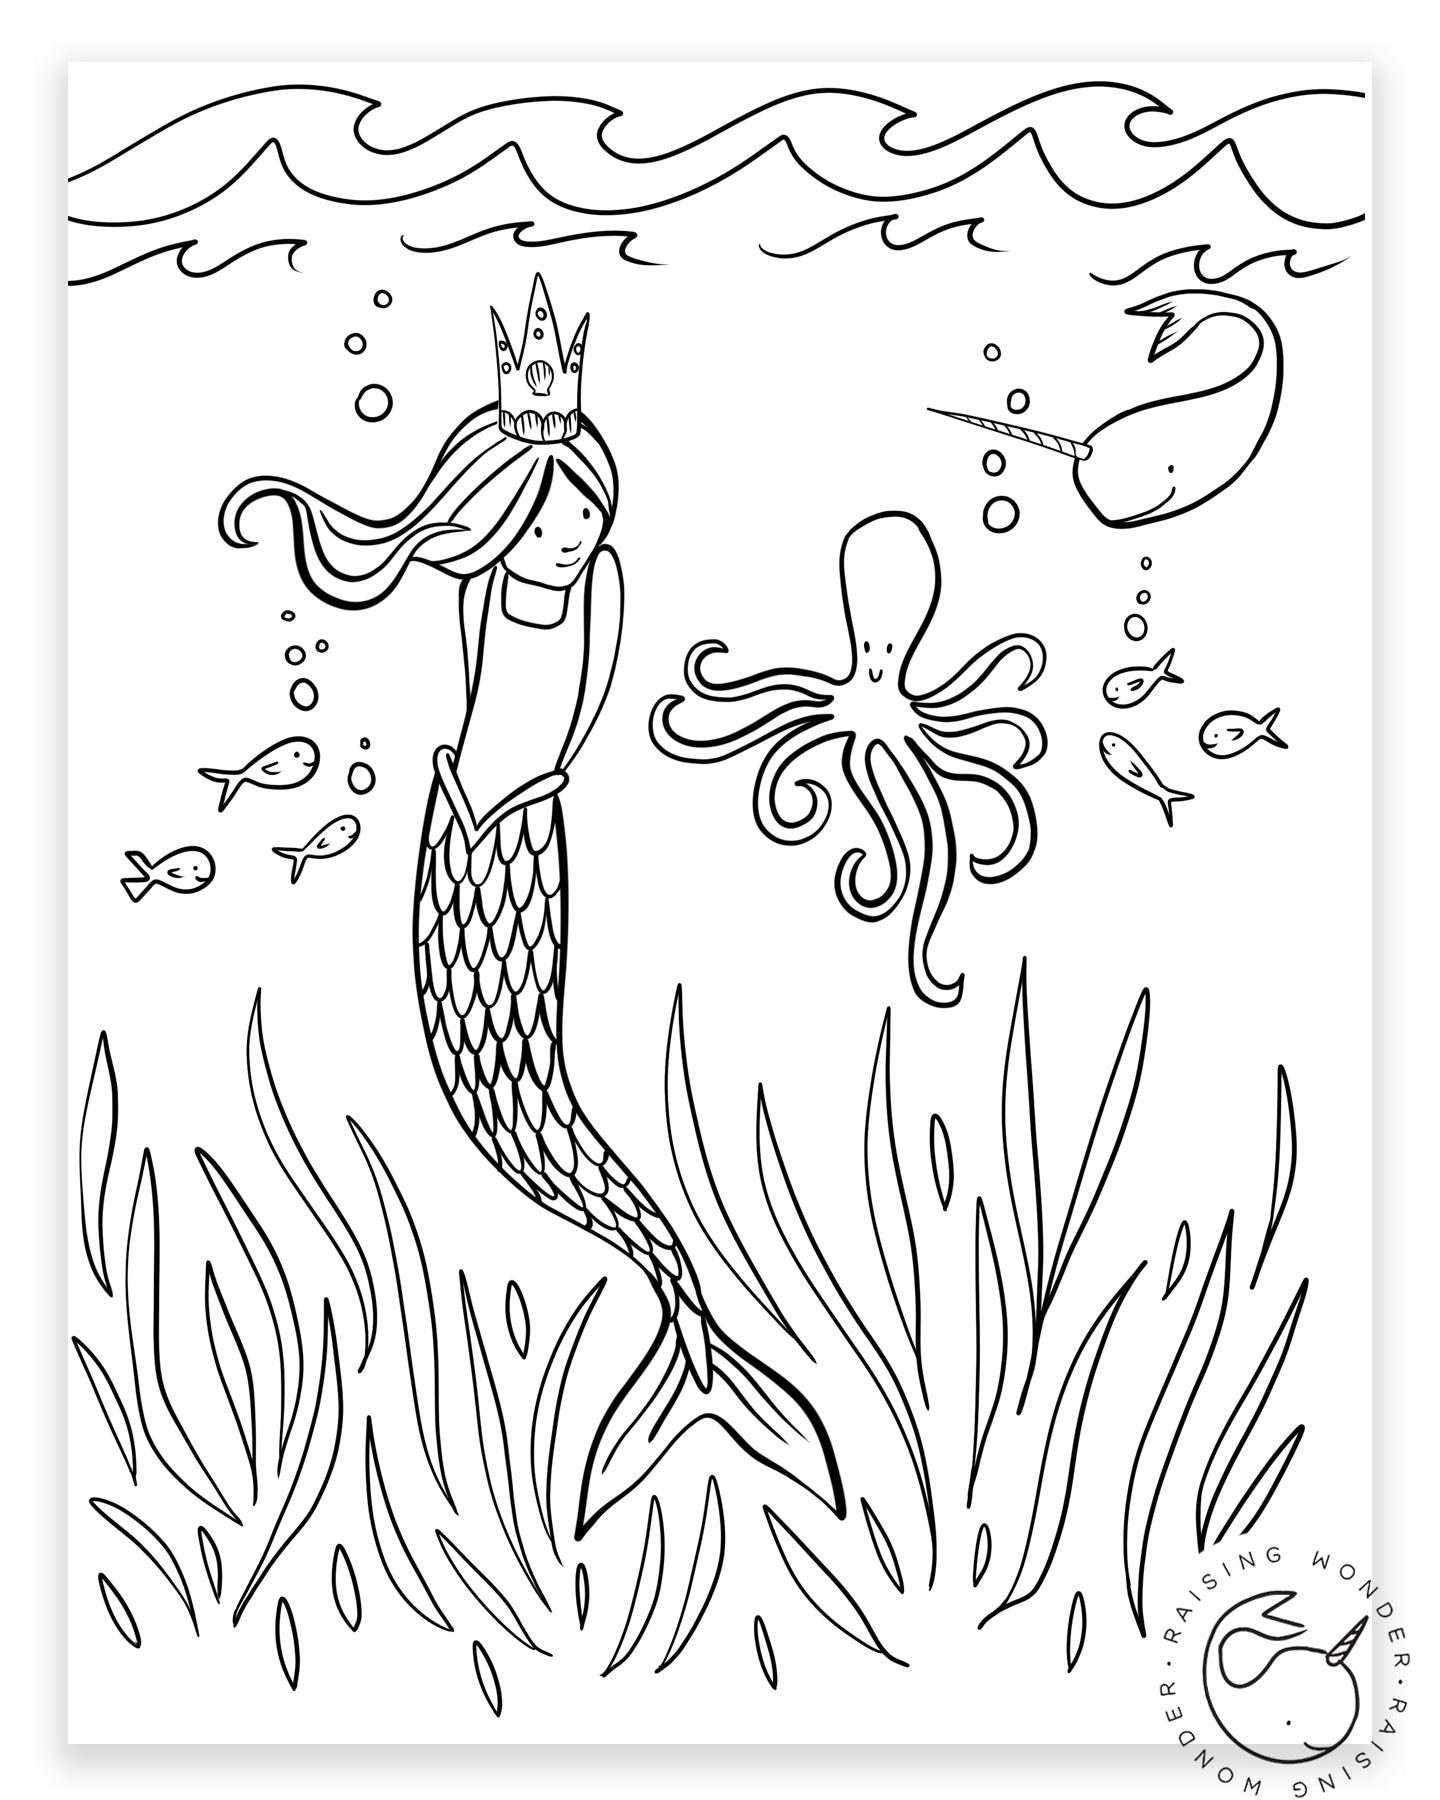 All About Mermaids Mini Coloring Book – Sugar Moon Bloom